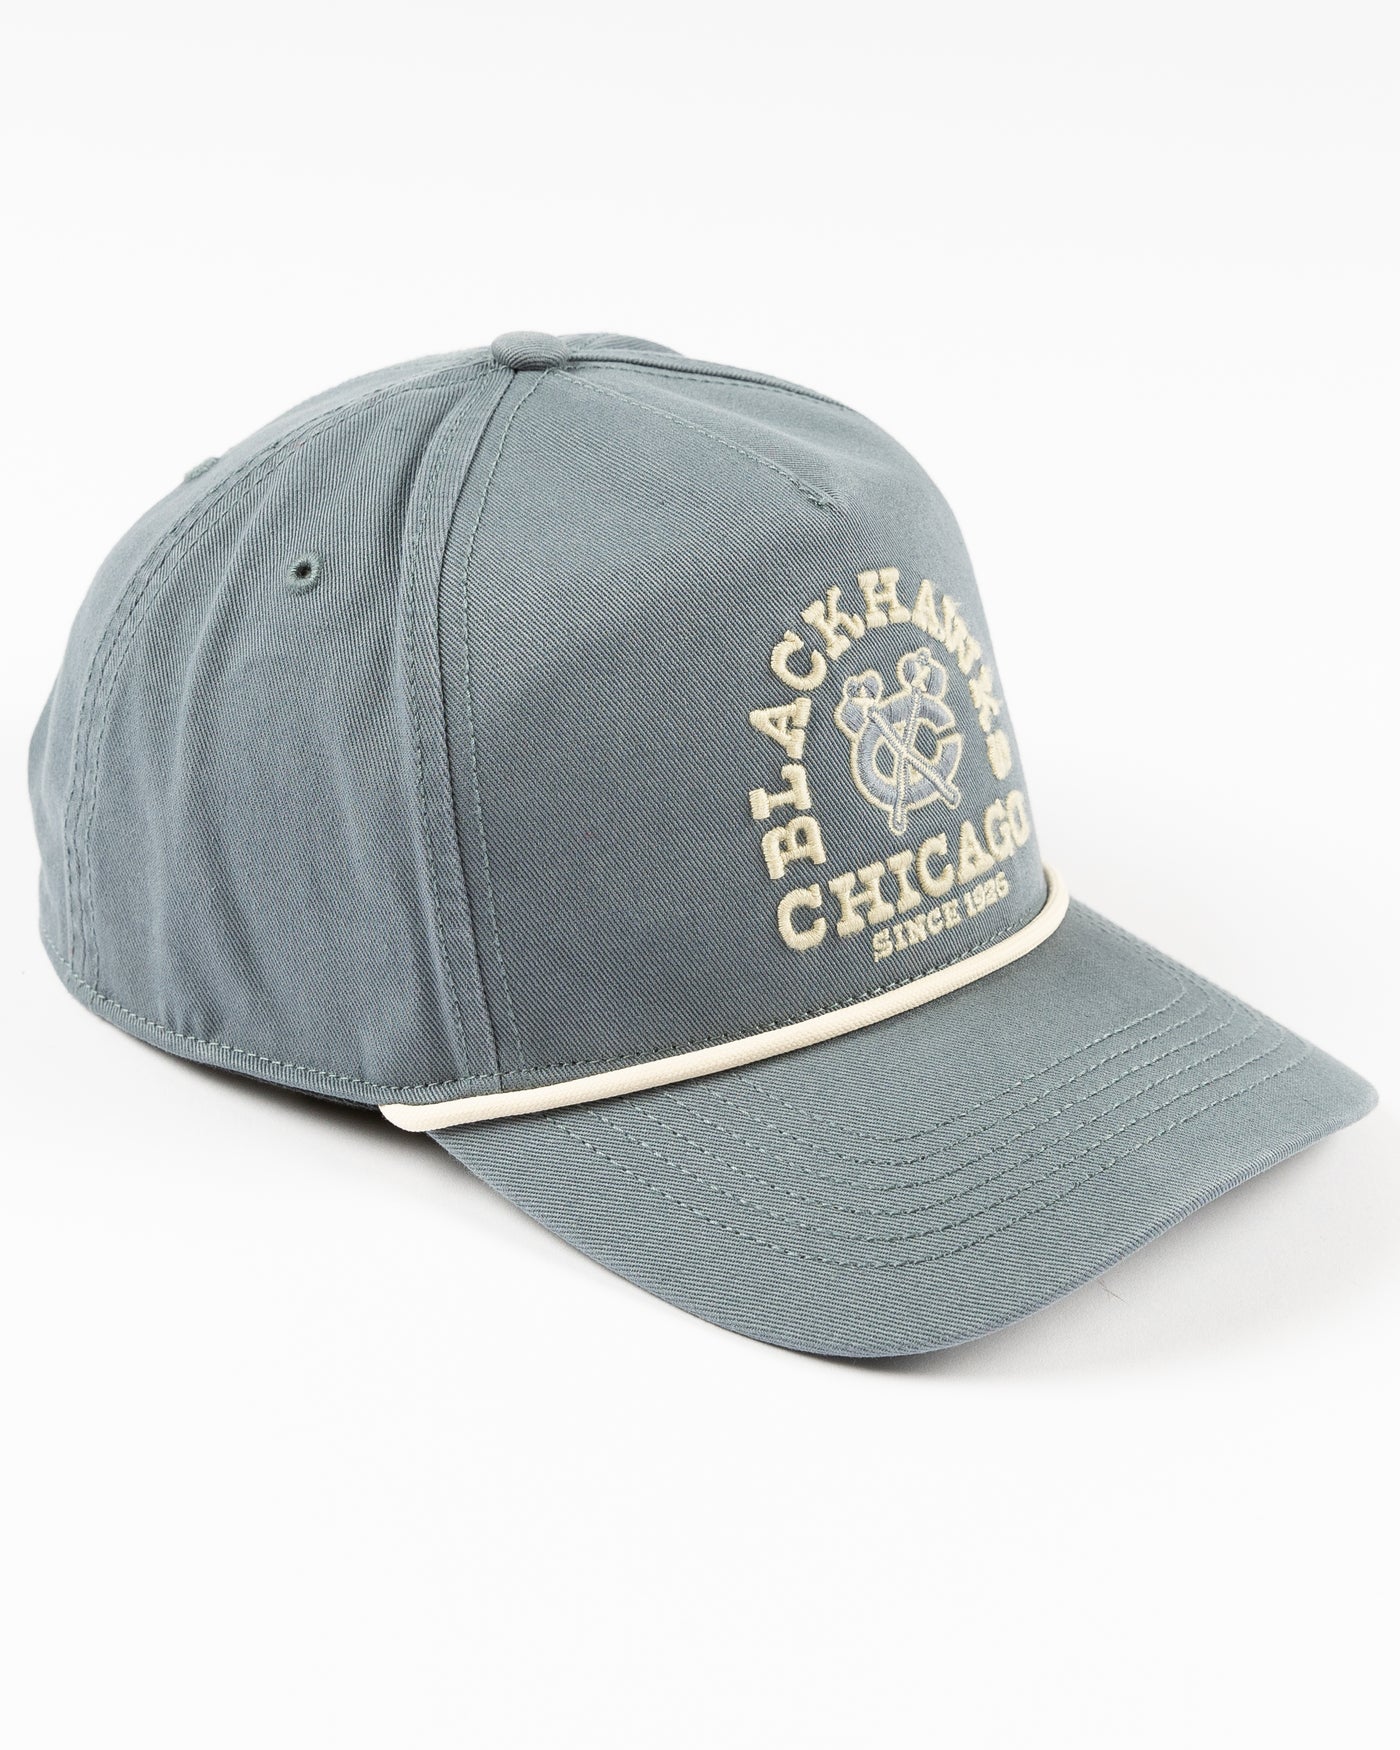 light blue '47 brand rope hat with embroidered Chicago Blackhawks wordmark and secondary logo on front - right angle lay flat